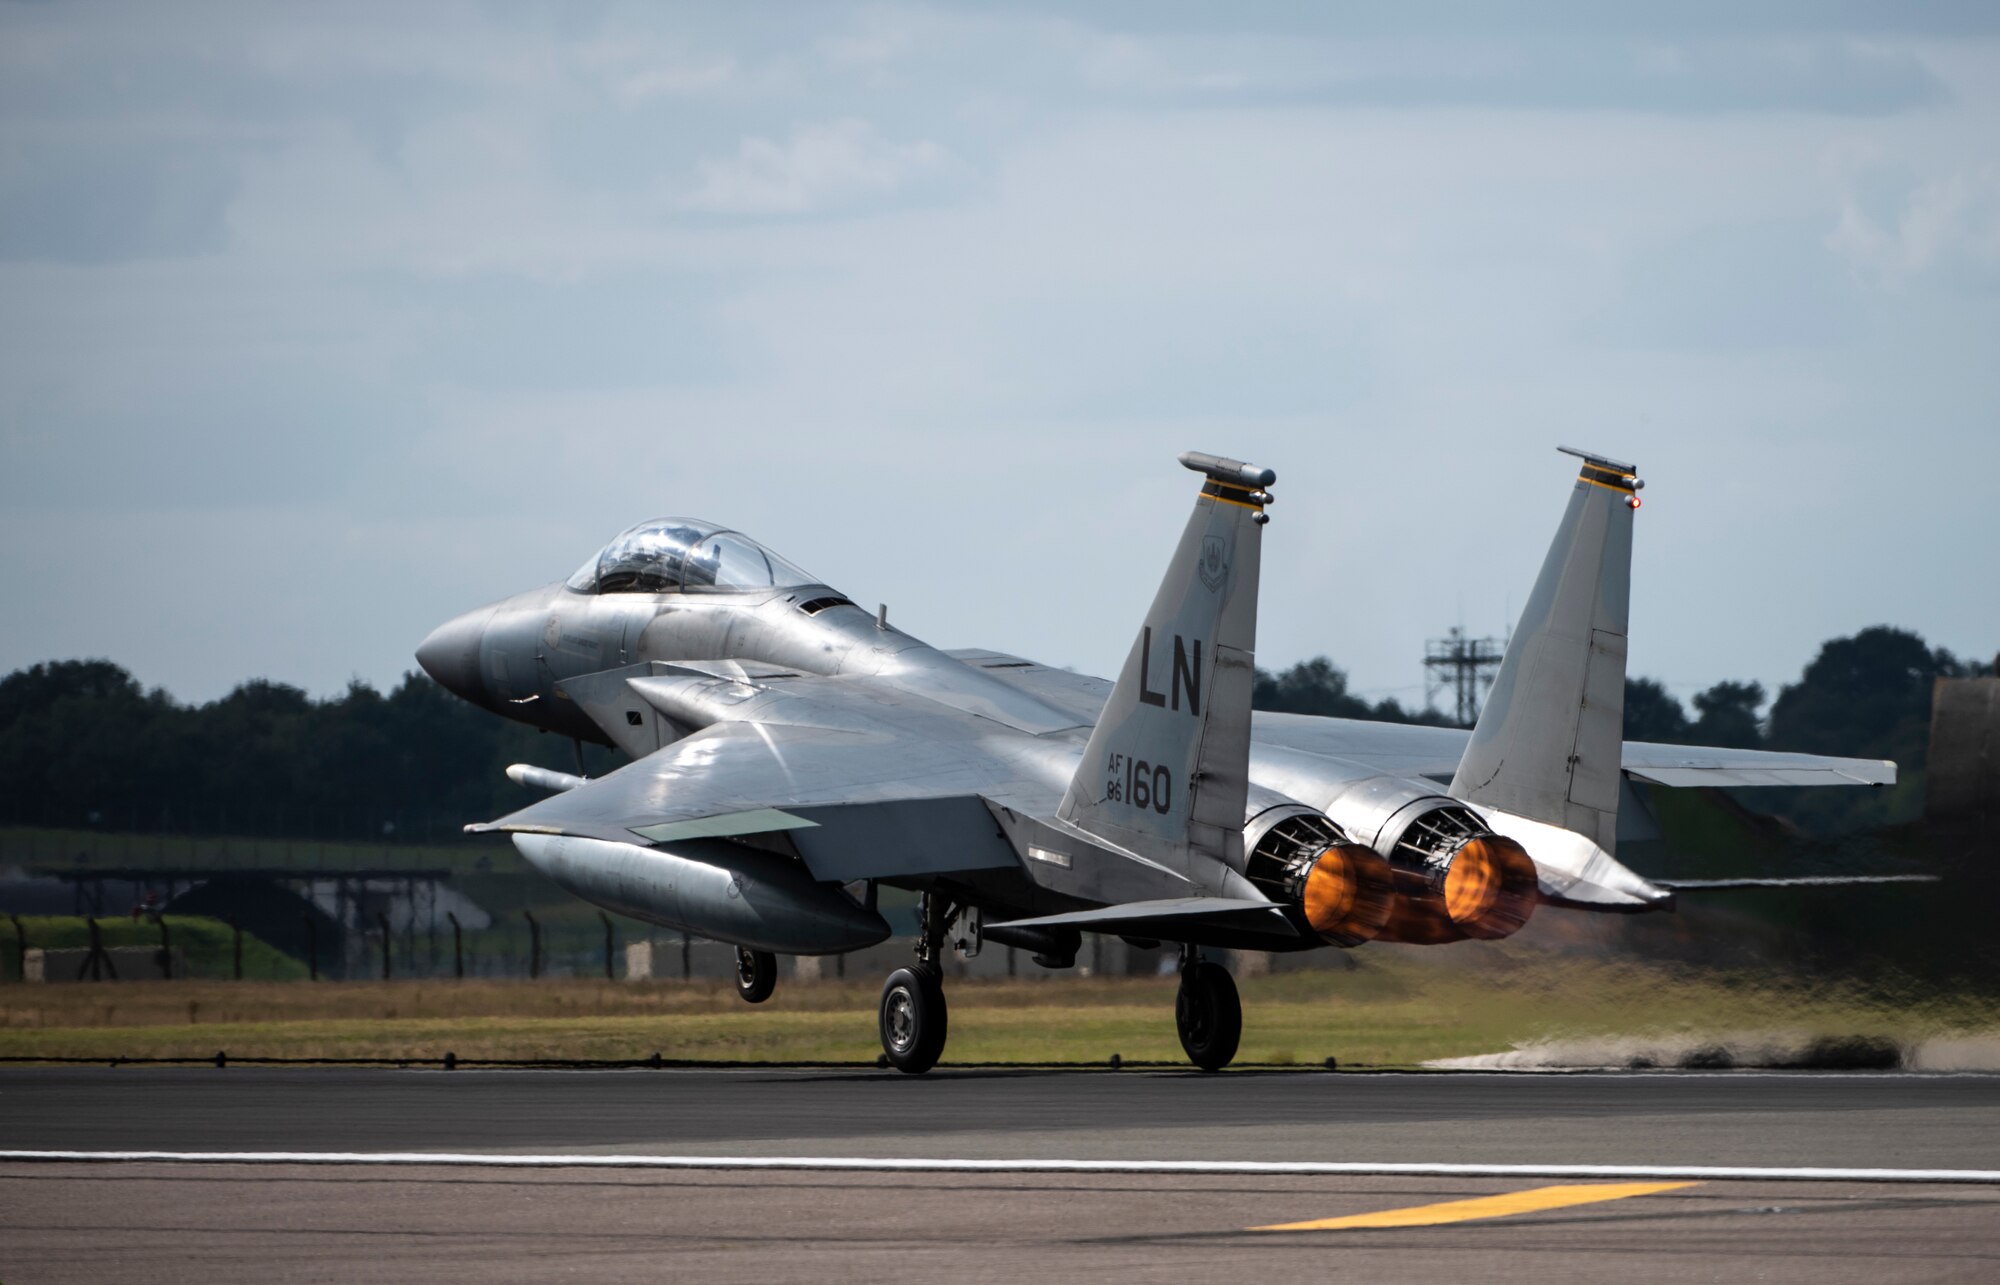 An F-15C Eagle assigned to the 493rd Fighter Squadron takes off in support of exercise Point Blank 20-4 at Royal Air Force Lakenheath, England, Sept. 10, 2020.  Exercises like Point Blank increase interoperability and collective readiness with other NATO forces, deter potential adversaries and ensure the skies above the European theater remain sovereign. (U.S. Air Force photo by Airman 1st Class Jessi Monte)